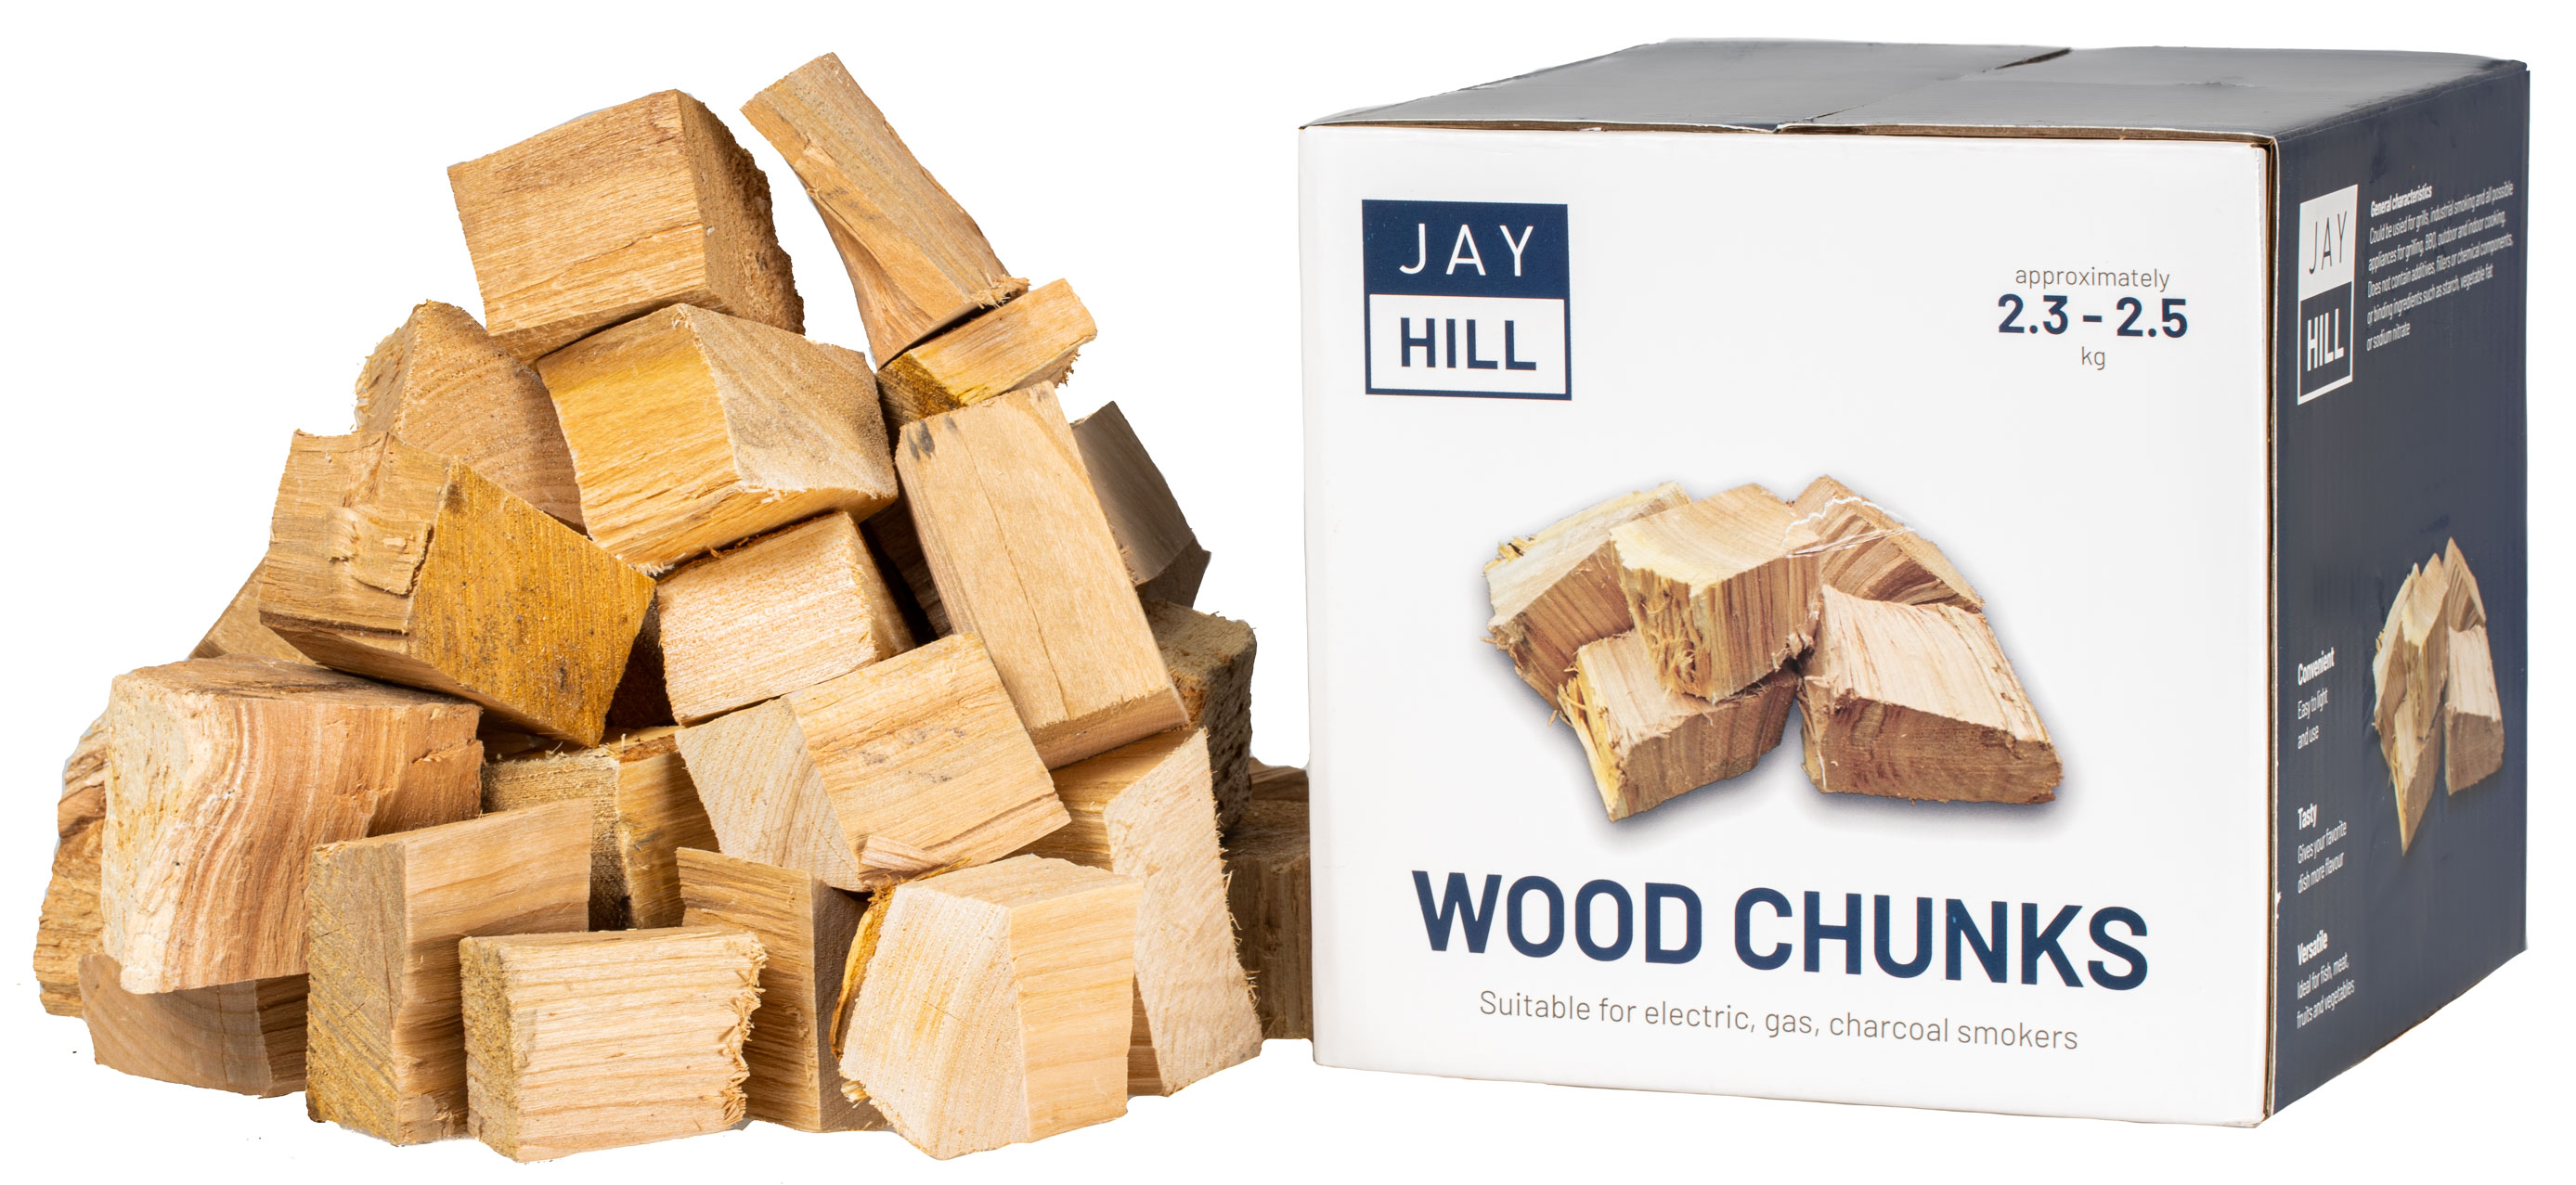 Jay Hill Rookhout Cherry Wood Chunks 